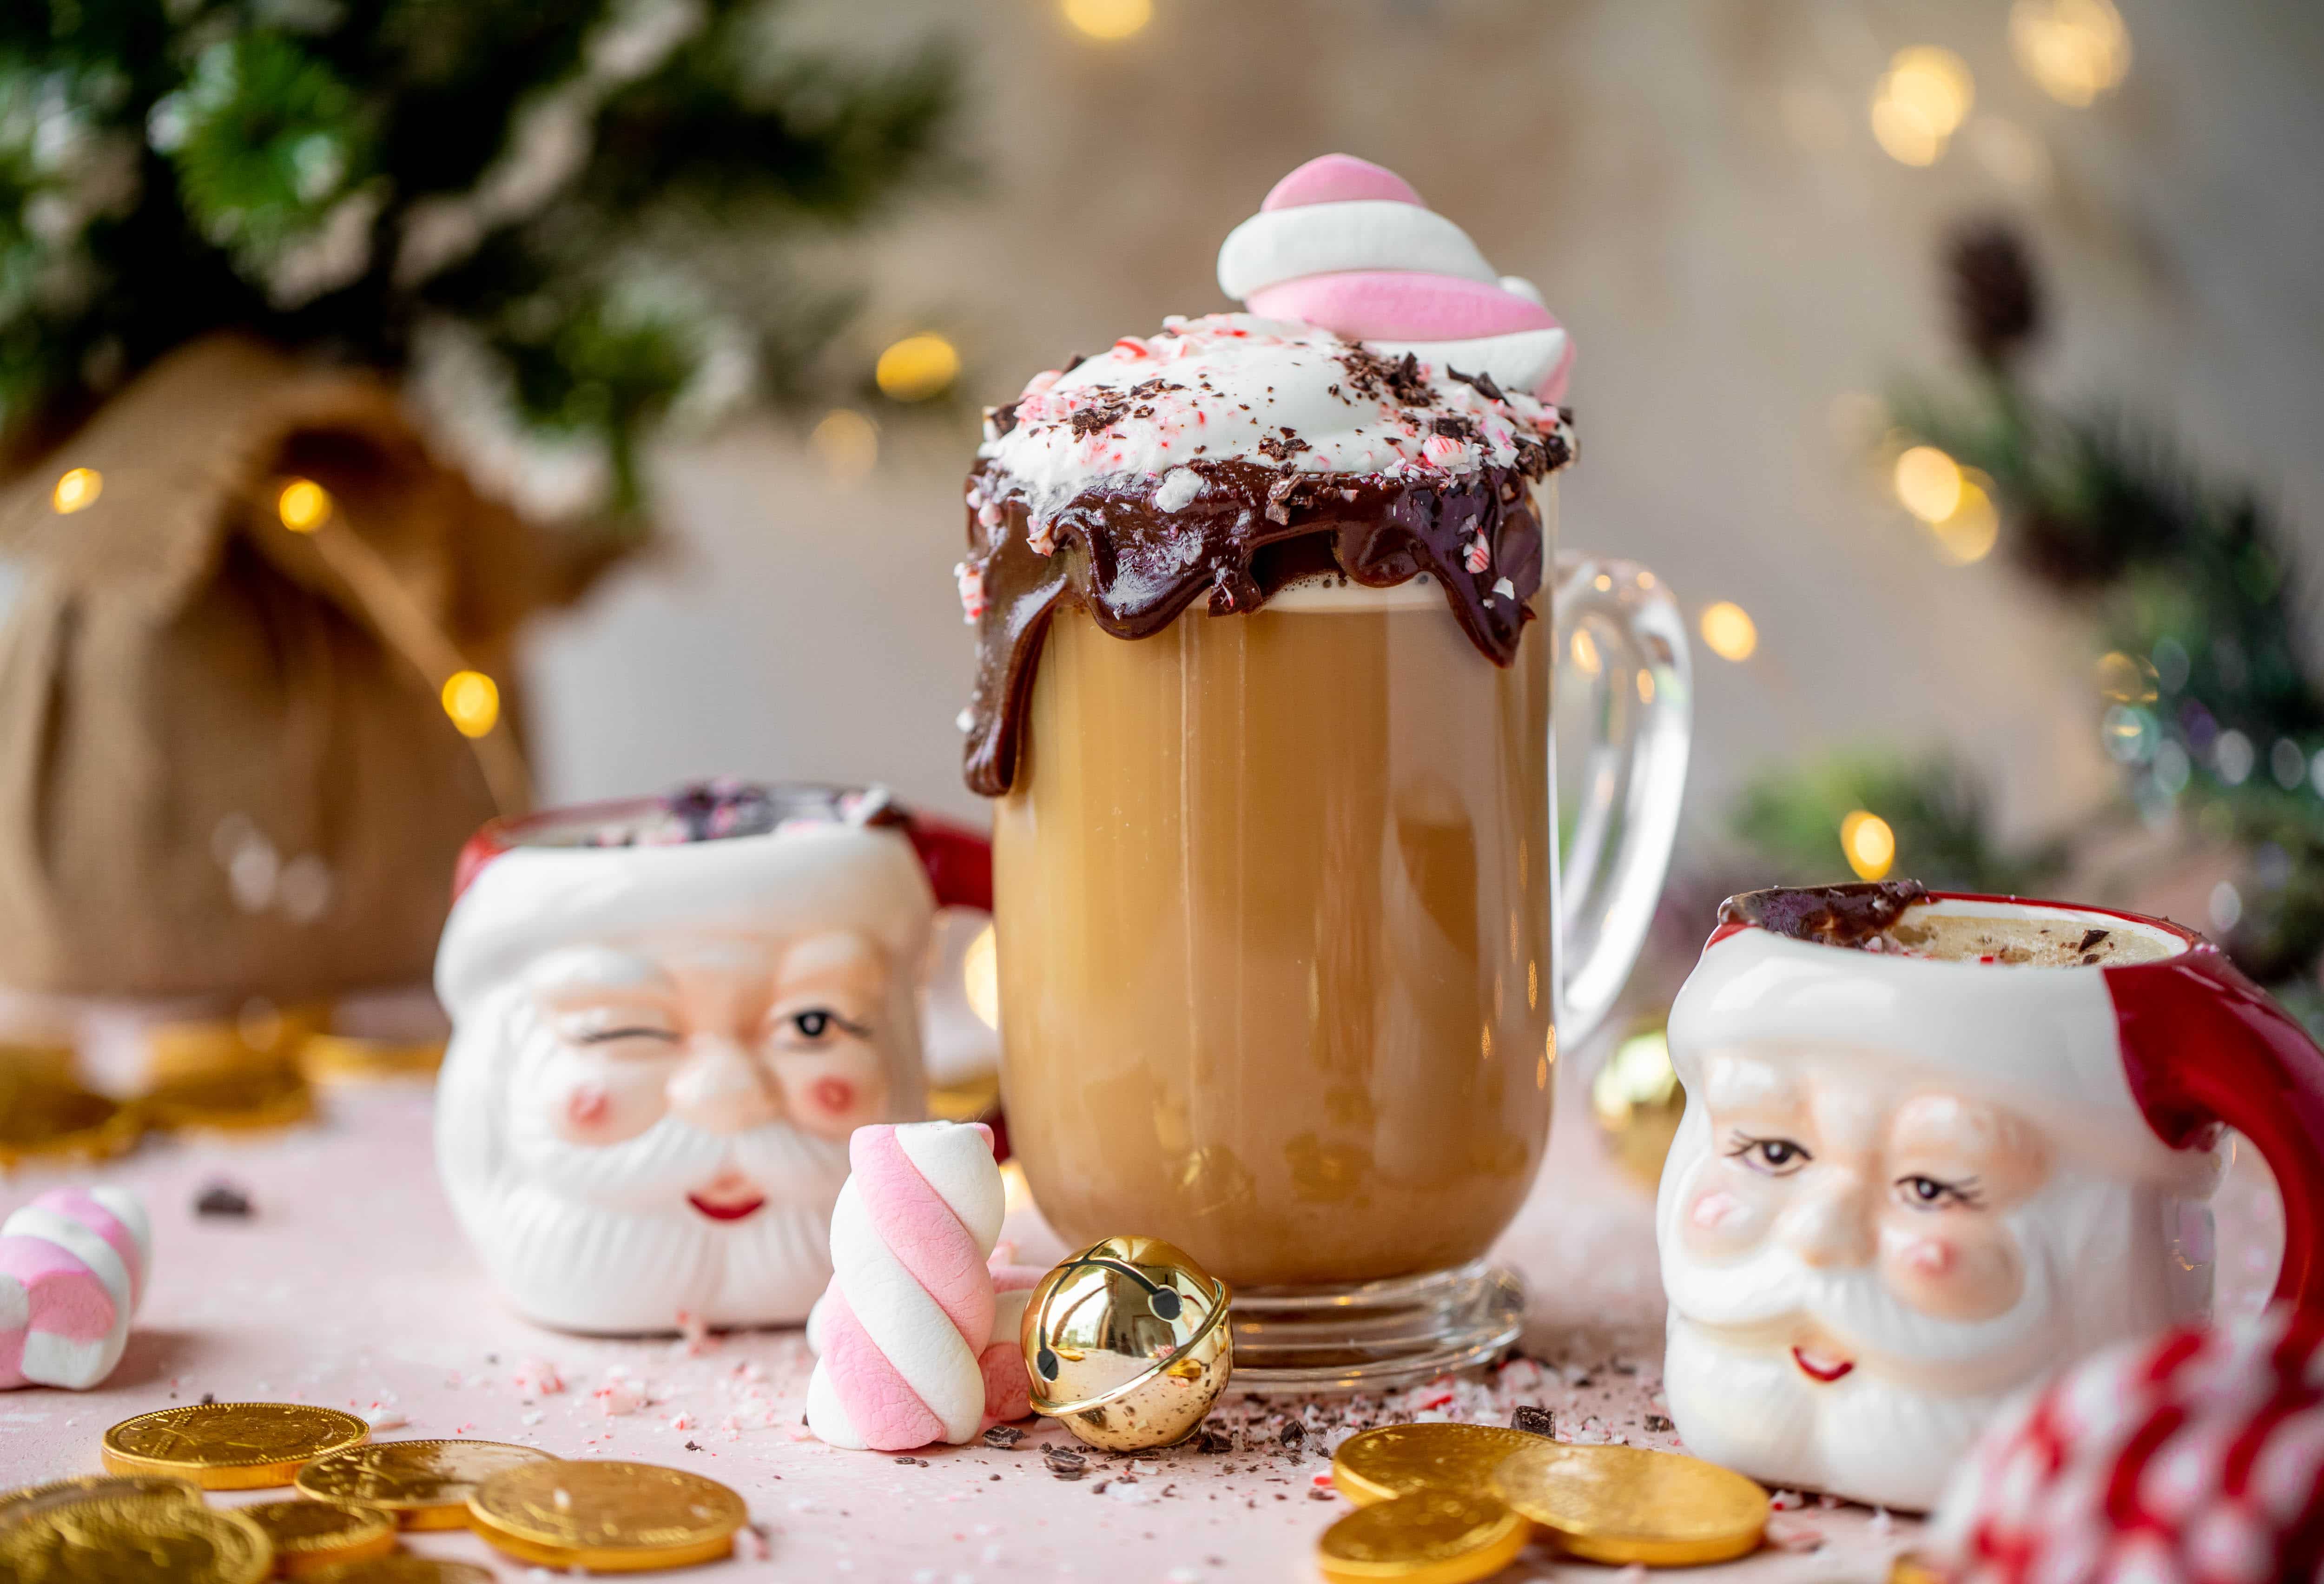 The saint nick special cocktail is perfect for the holiday season! Coffee, whiskey and irish cream come together to create a comforting, delish drink!